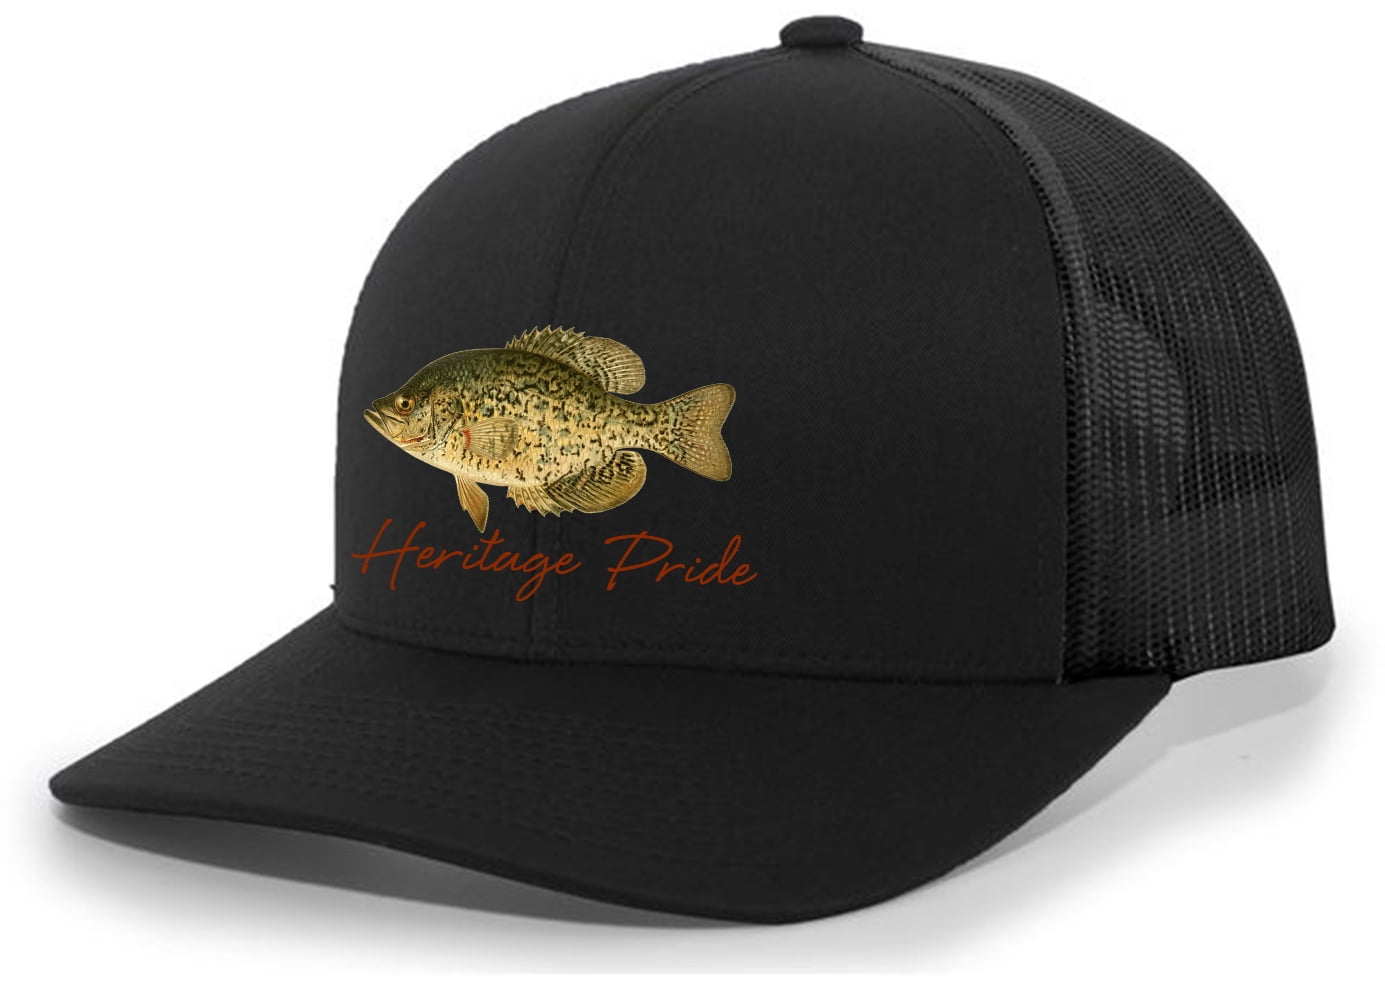 Heritage Pride Freshwater Fish Collection Crappie Fishing Mens Embroidered  Mesh Back Trucker Hat Baseball Cap, Black/Black 